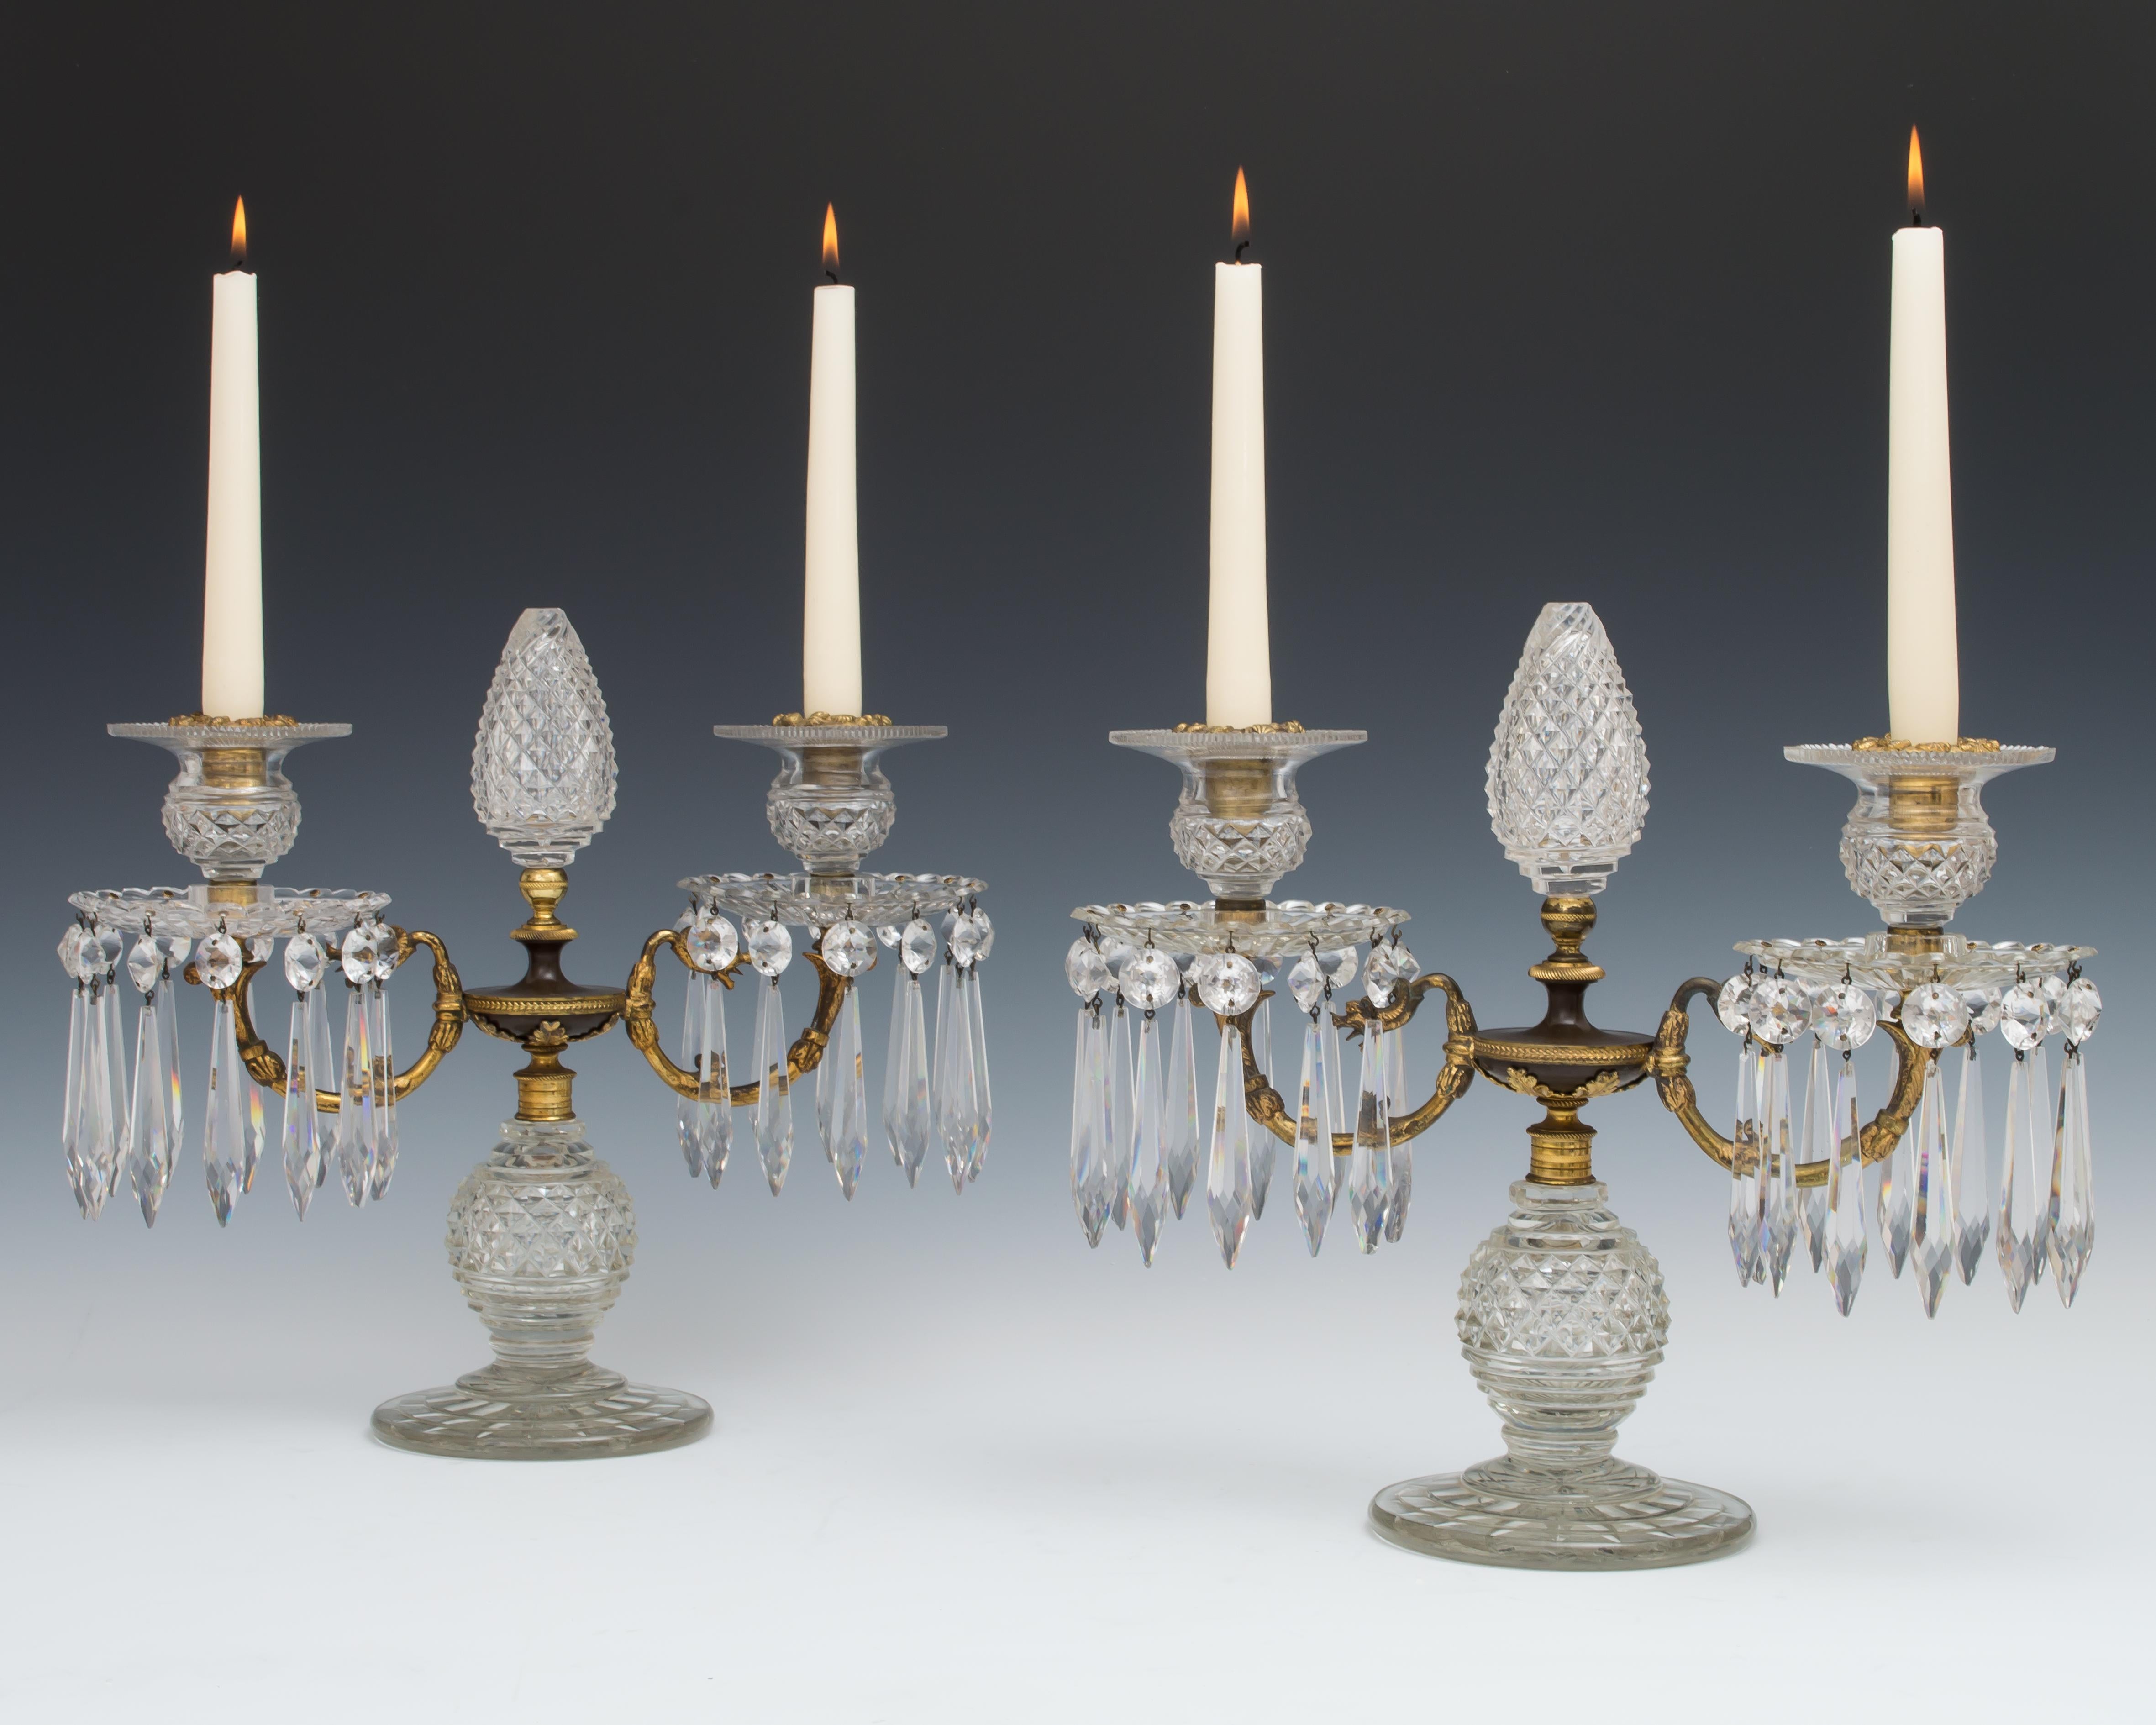 Fine Quality Pair of Bronze and Gilt Regency Period Candelabra In Good Condition For Sale In Steyning, West sussex